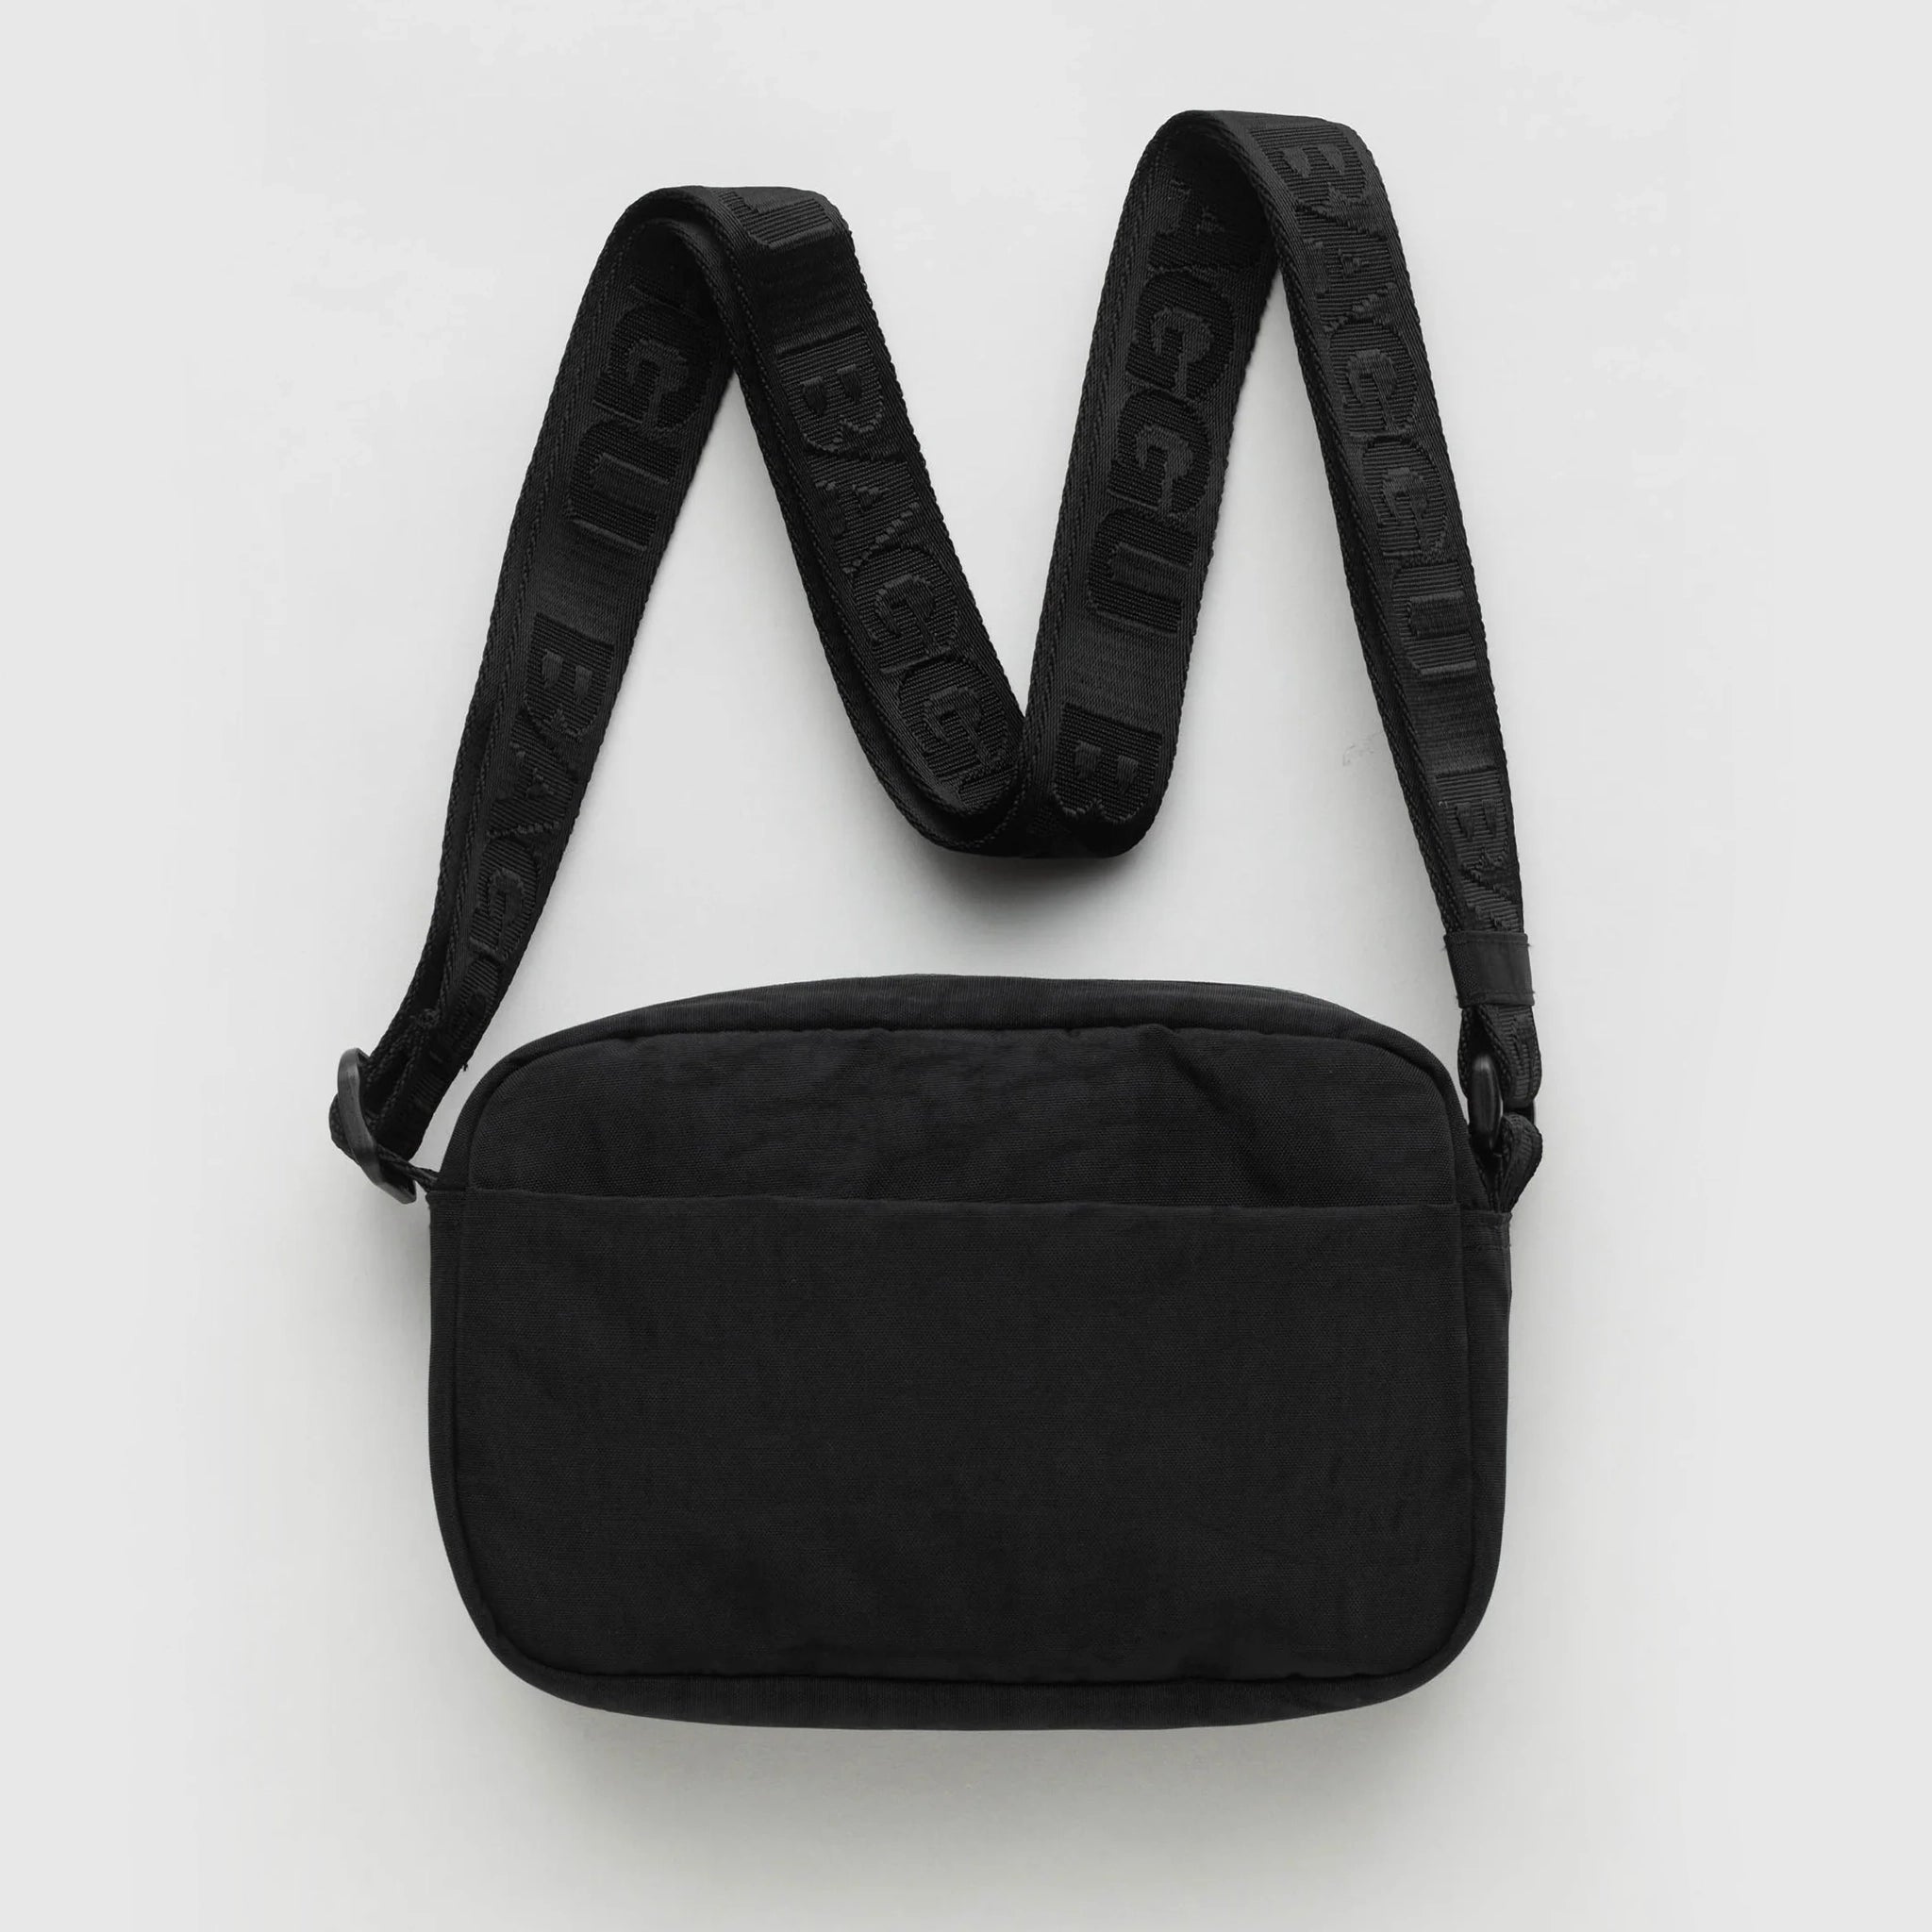 On a light grey background is a black crossbody made of sturdy nylon material with a black adjustable strap that has &quot;BAGGU&quot; stitched into it in a shinier black material.